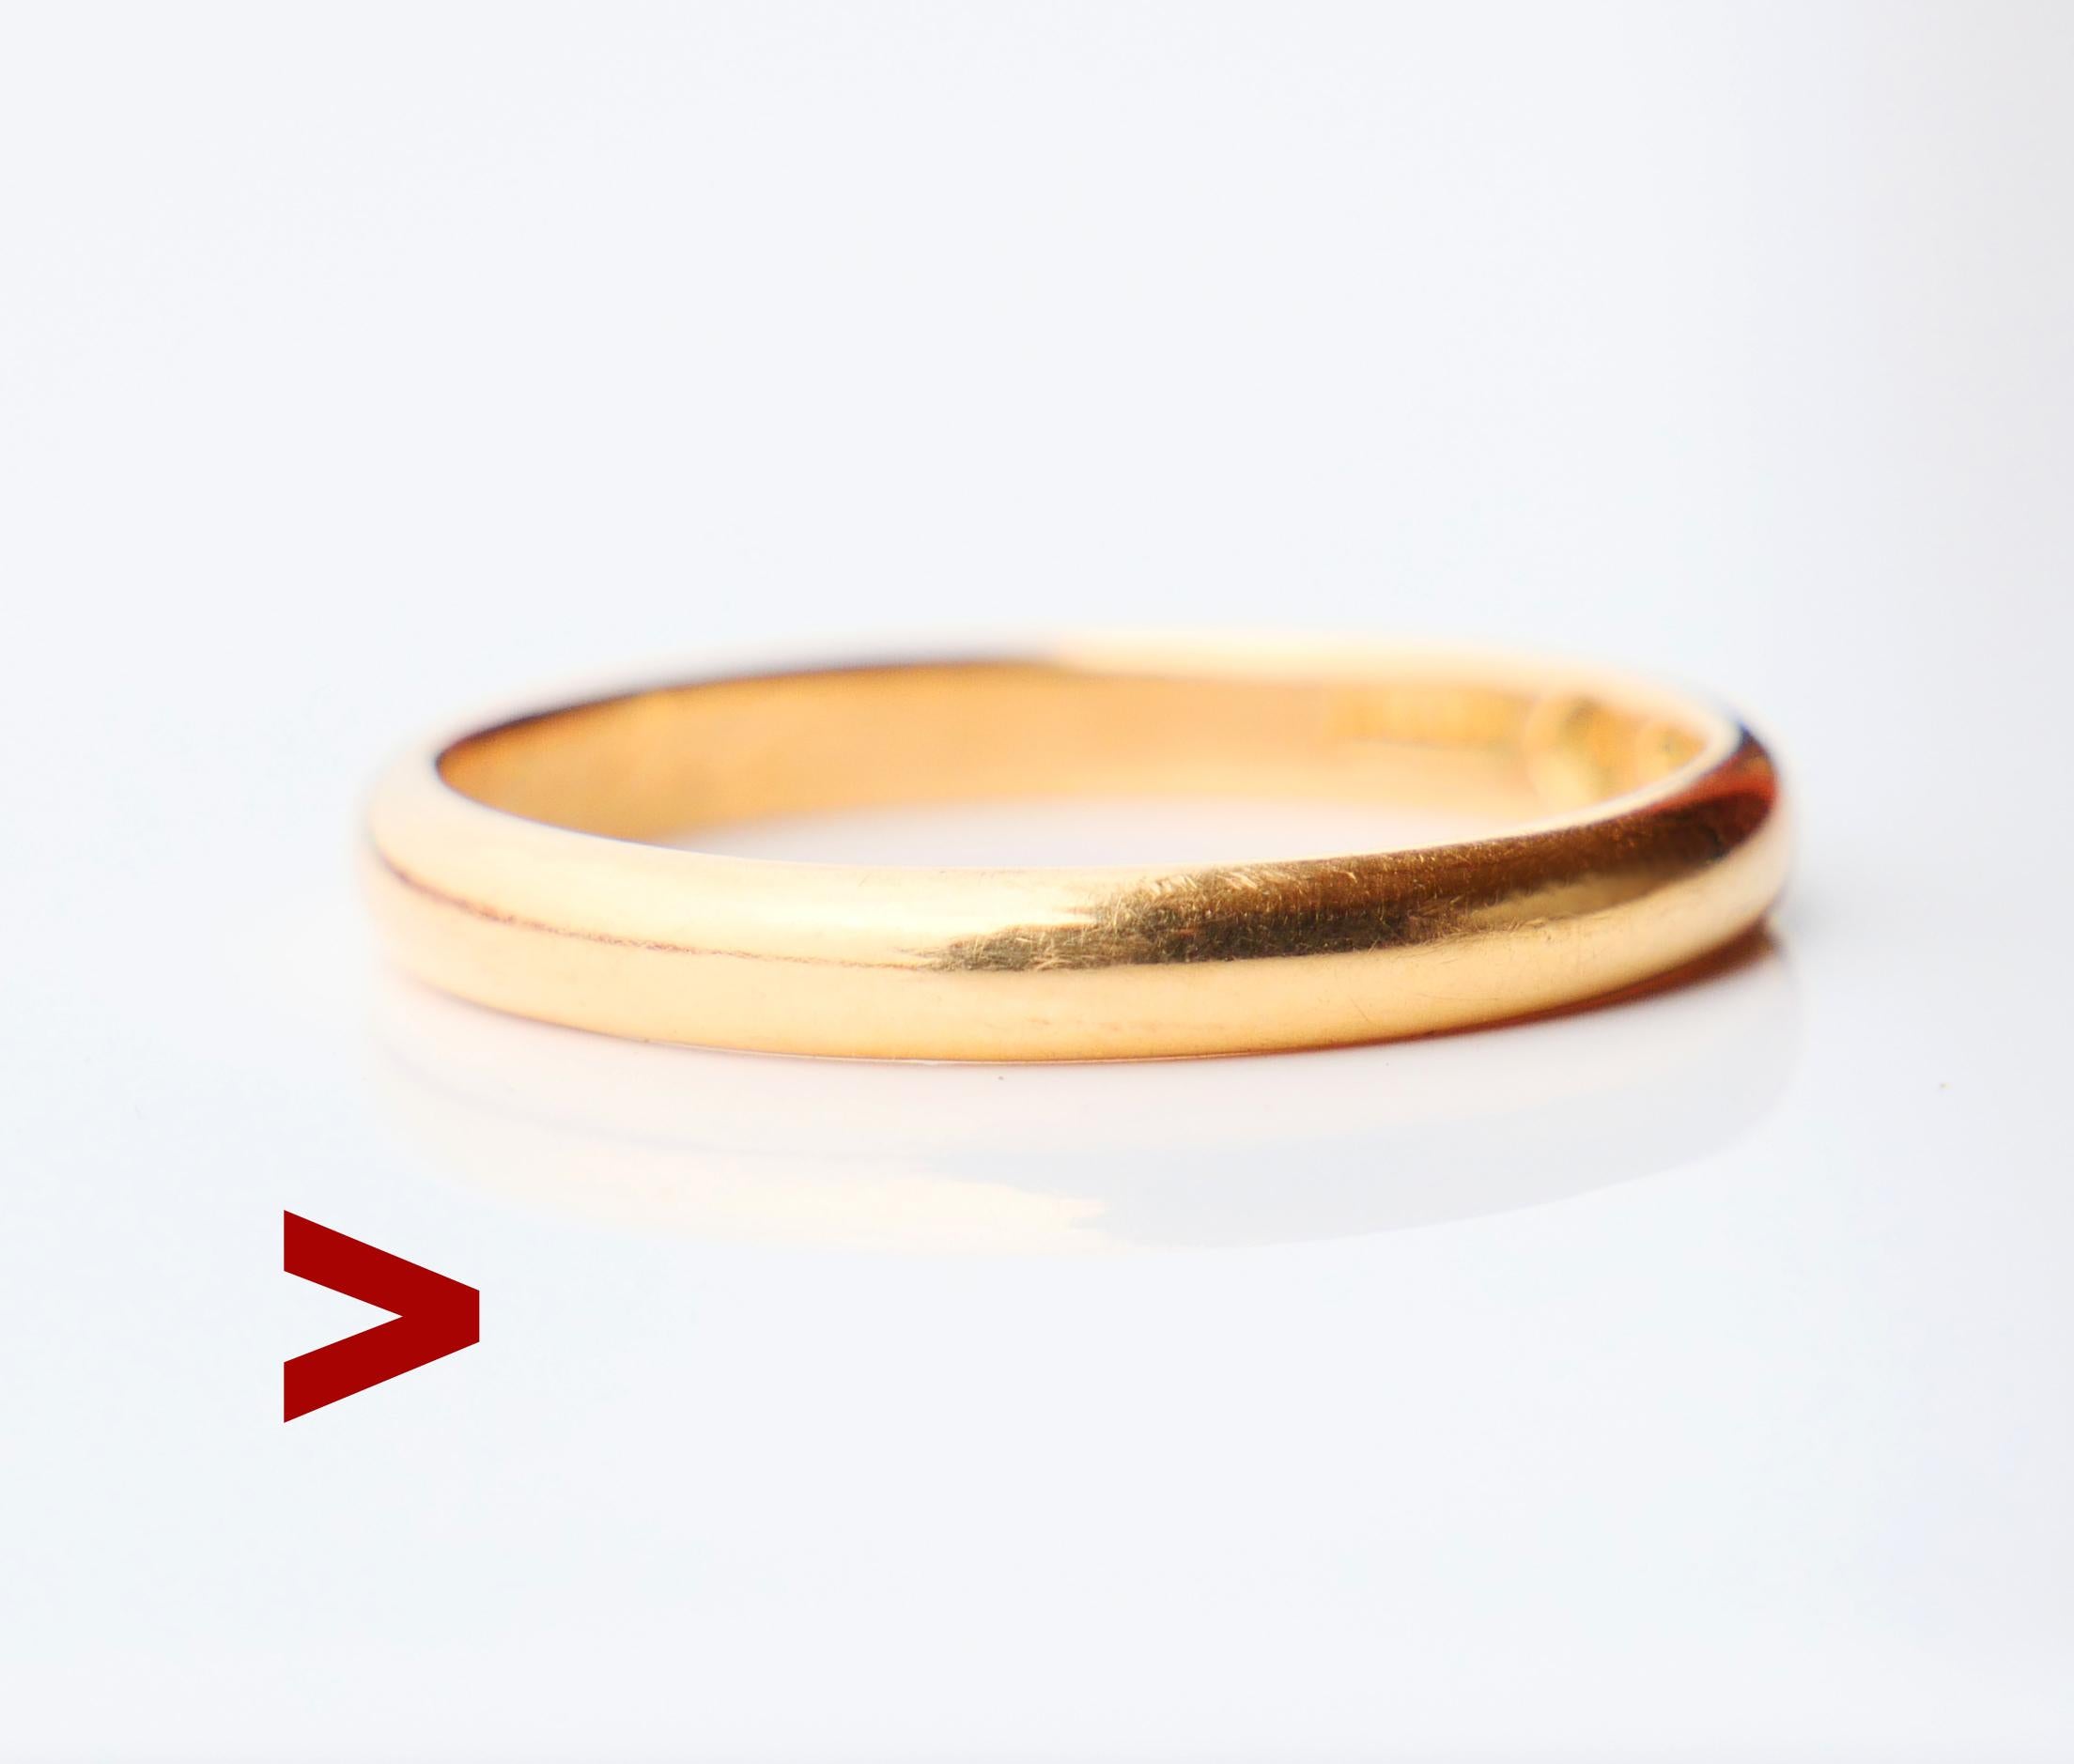 Regular type 18K Yellow Gold Wedding Ring . In fine used condition.

Made in Sweden ,hallmarked 18K,date code is X8/ made in 1947. Engraved with name and date (worn)

Band is 3 mm wide. Size : Ø 10 US / 19.84 mm. No traces of previous sizings .